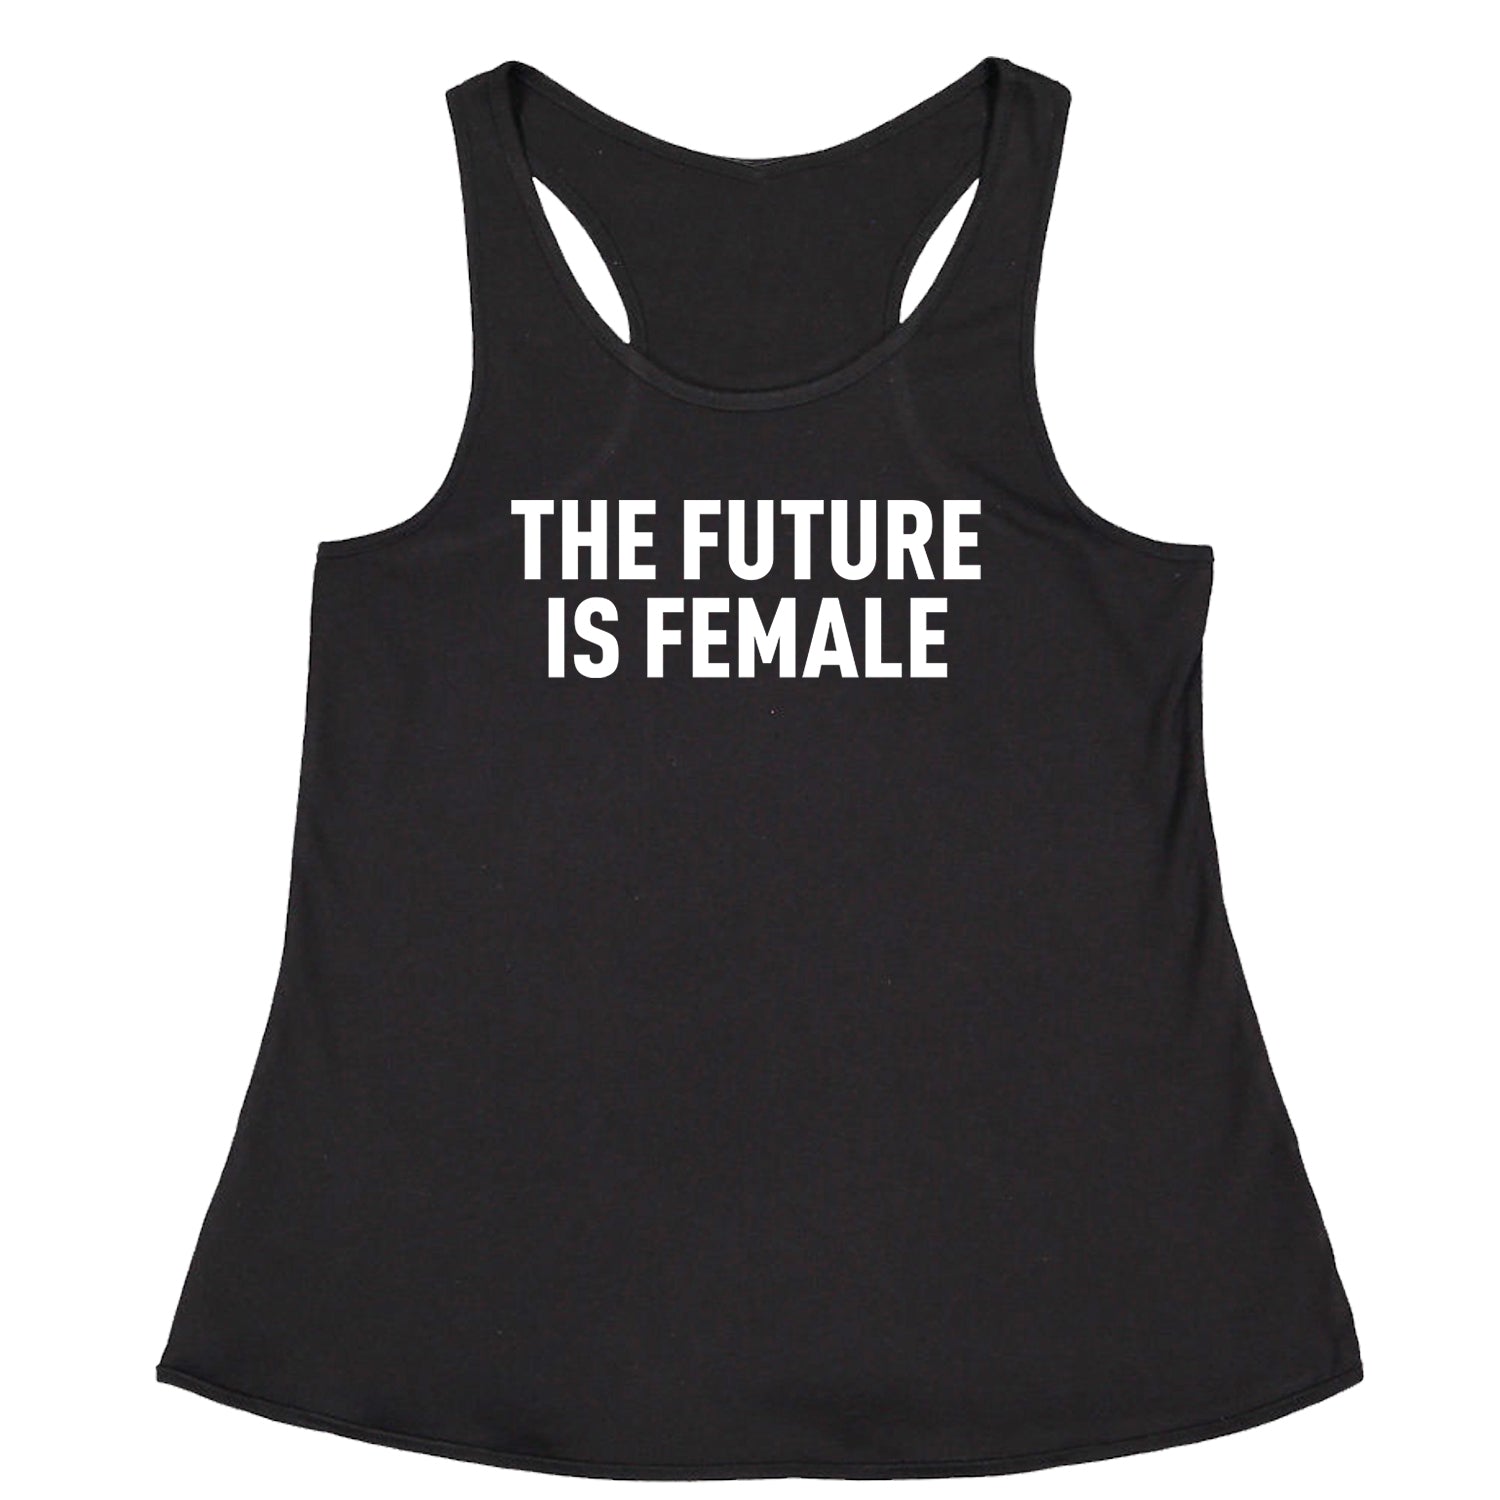 The Future Is Female Feminism Racerback Tank Top for Women female, feminism, feminist, femme, future, is, liberation, suffrage, the by Expression Tees